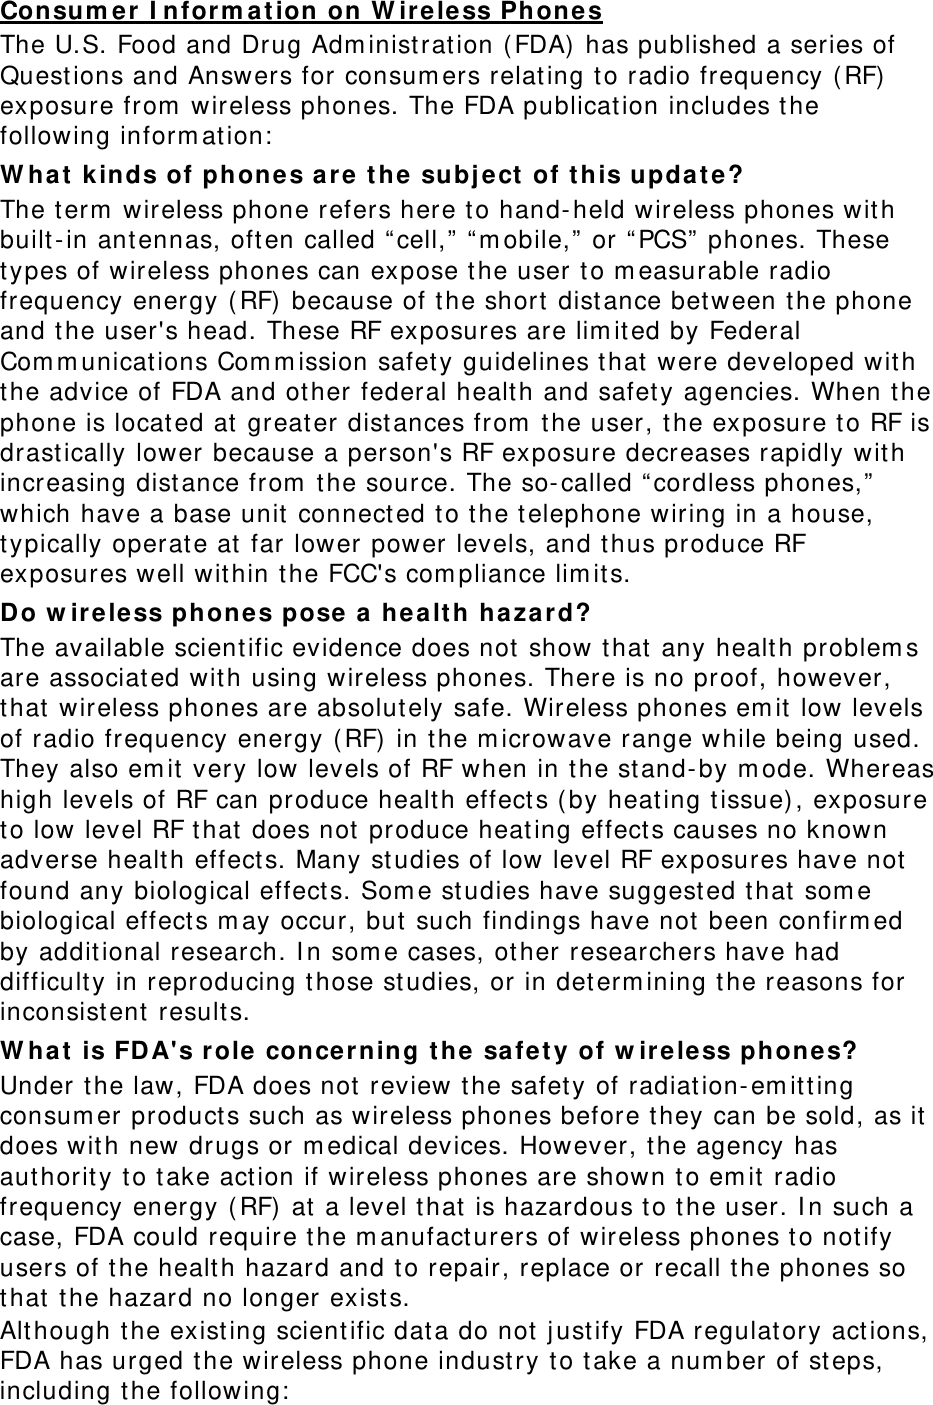 Consum er I nform at ion on W ire less Phon e s The U.S. Food and Drug Adm inistration ( FDA) has published a series of Quest ions and Answers for consum ers relating to radio frequency ( RF)  exposure from  wireless phones. The FDA publication includes the following inform at ion:  W hat  k inds of phone s ar e  t he subj ect  of t his upda t e? The t erm  wireless phone refers here to hand- held wireless phones with built- in antennas, oft en called “ cell,”  “ m obile,”  or “ PCS”  phones. These types of wireless phones can expose t he user t o m easurable radio frequency energy ( RF)  because of t he short  dist ance bet ween t he phone and the user&apos;s head. These RF exposures are lim it ed by Federal Com m unications Com m ission safety guidelines that  were developed wit h the advice of FDA and other federal healt h and safety agencies. When t he phone is located at greater distances from  t he user, t he exposure to RF is drast ically lower because a person&apos;s RF exposure decreases rapidly with increasing distance from  the source. The so-called “ cordless phones,”  which have a base unit connect ed t o t he telephone wiring in a house, typically operat e at  far lower power levels, and thus produce RF exposures well within the FCC&apos;s com pliance lim it s. Do w ir e le ss phones pose  a  he a lt h ha zard? The available scient ific evidence does not show that  any health problem s are associated with using wireless phones. There is no proof, however, that  wireless phones are absolut ely safe. Wireless phones em it  low levels of radio frequency energy ( RF)  in the m icrowave range while being used. They also em it  very low levels of RF when in t he st and- by m ode. Whereas high levels of RF can produce health effect s ( by heating tissue) , exposure to low level RF t hat  does not produce heat ing effect s causes no known adverse health effect s. Many studies of low level RF exposures have not found any biological effect s. Som e studies have suggest ed that  som e biological effect s m ay occur, but such findings have not  been confirm ed by additional research. I n som e cases, other researchers have had difficulty in reproducing those studies, or in determ ining t he reasons for inconsist ent  results. W hat  is FD A&apos;s role  concerning t he  safe t y of w ir e le ss phones? Under t he law, FDA does not review t he safet y of radiation- em itt ing consum er product s such as wireless phones before they can be sold, as it does wit h new drugs or m edical devices. However, t he agency has aut hority t o take act ion if wireless phones are shown t o em it radio frequency energy ( RF)  at a level t hat is hazardous t o t he user. I n such a case, FDA could require the m anufact urers of wireless phones t o not ify users of t he health hazard and to repair, replace or recall t he phones so that  t he hazard no longer exist s. Alt hough t he existing scient ific data do not j ust ify FDA regulat ory act ions, FDA has urged the wireless phone industry to t ake a num ber of steps, including t he following:  